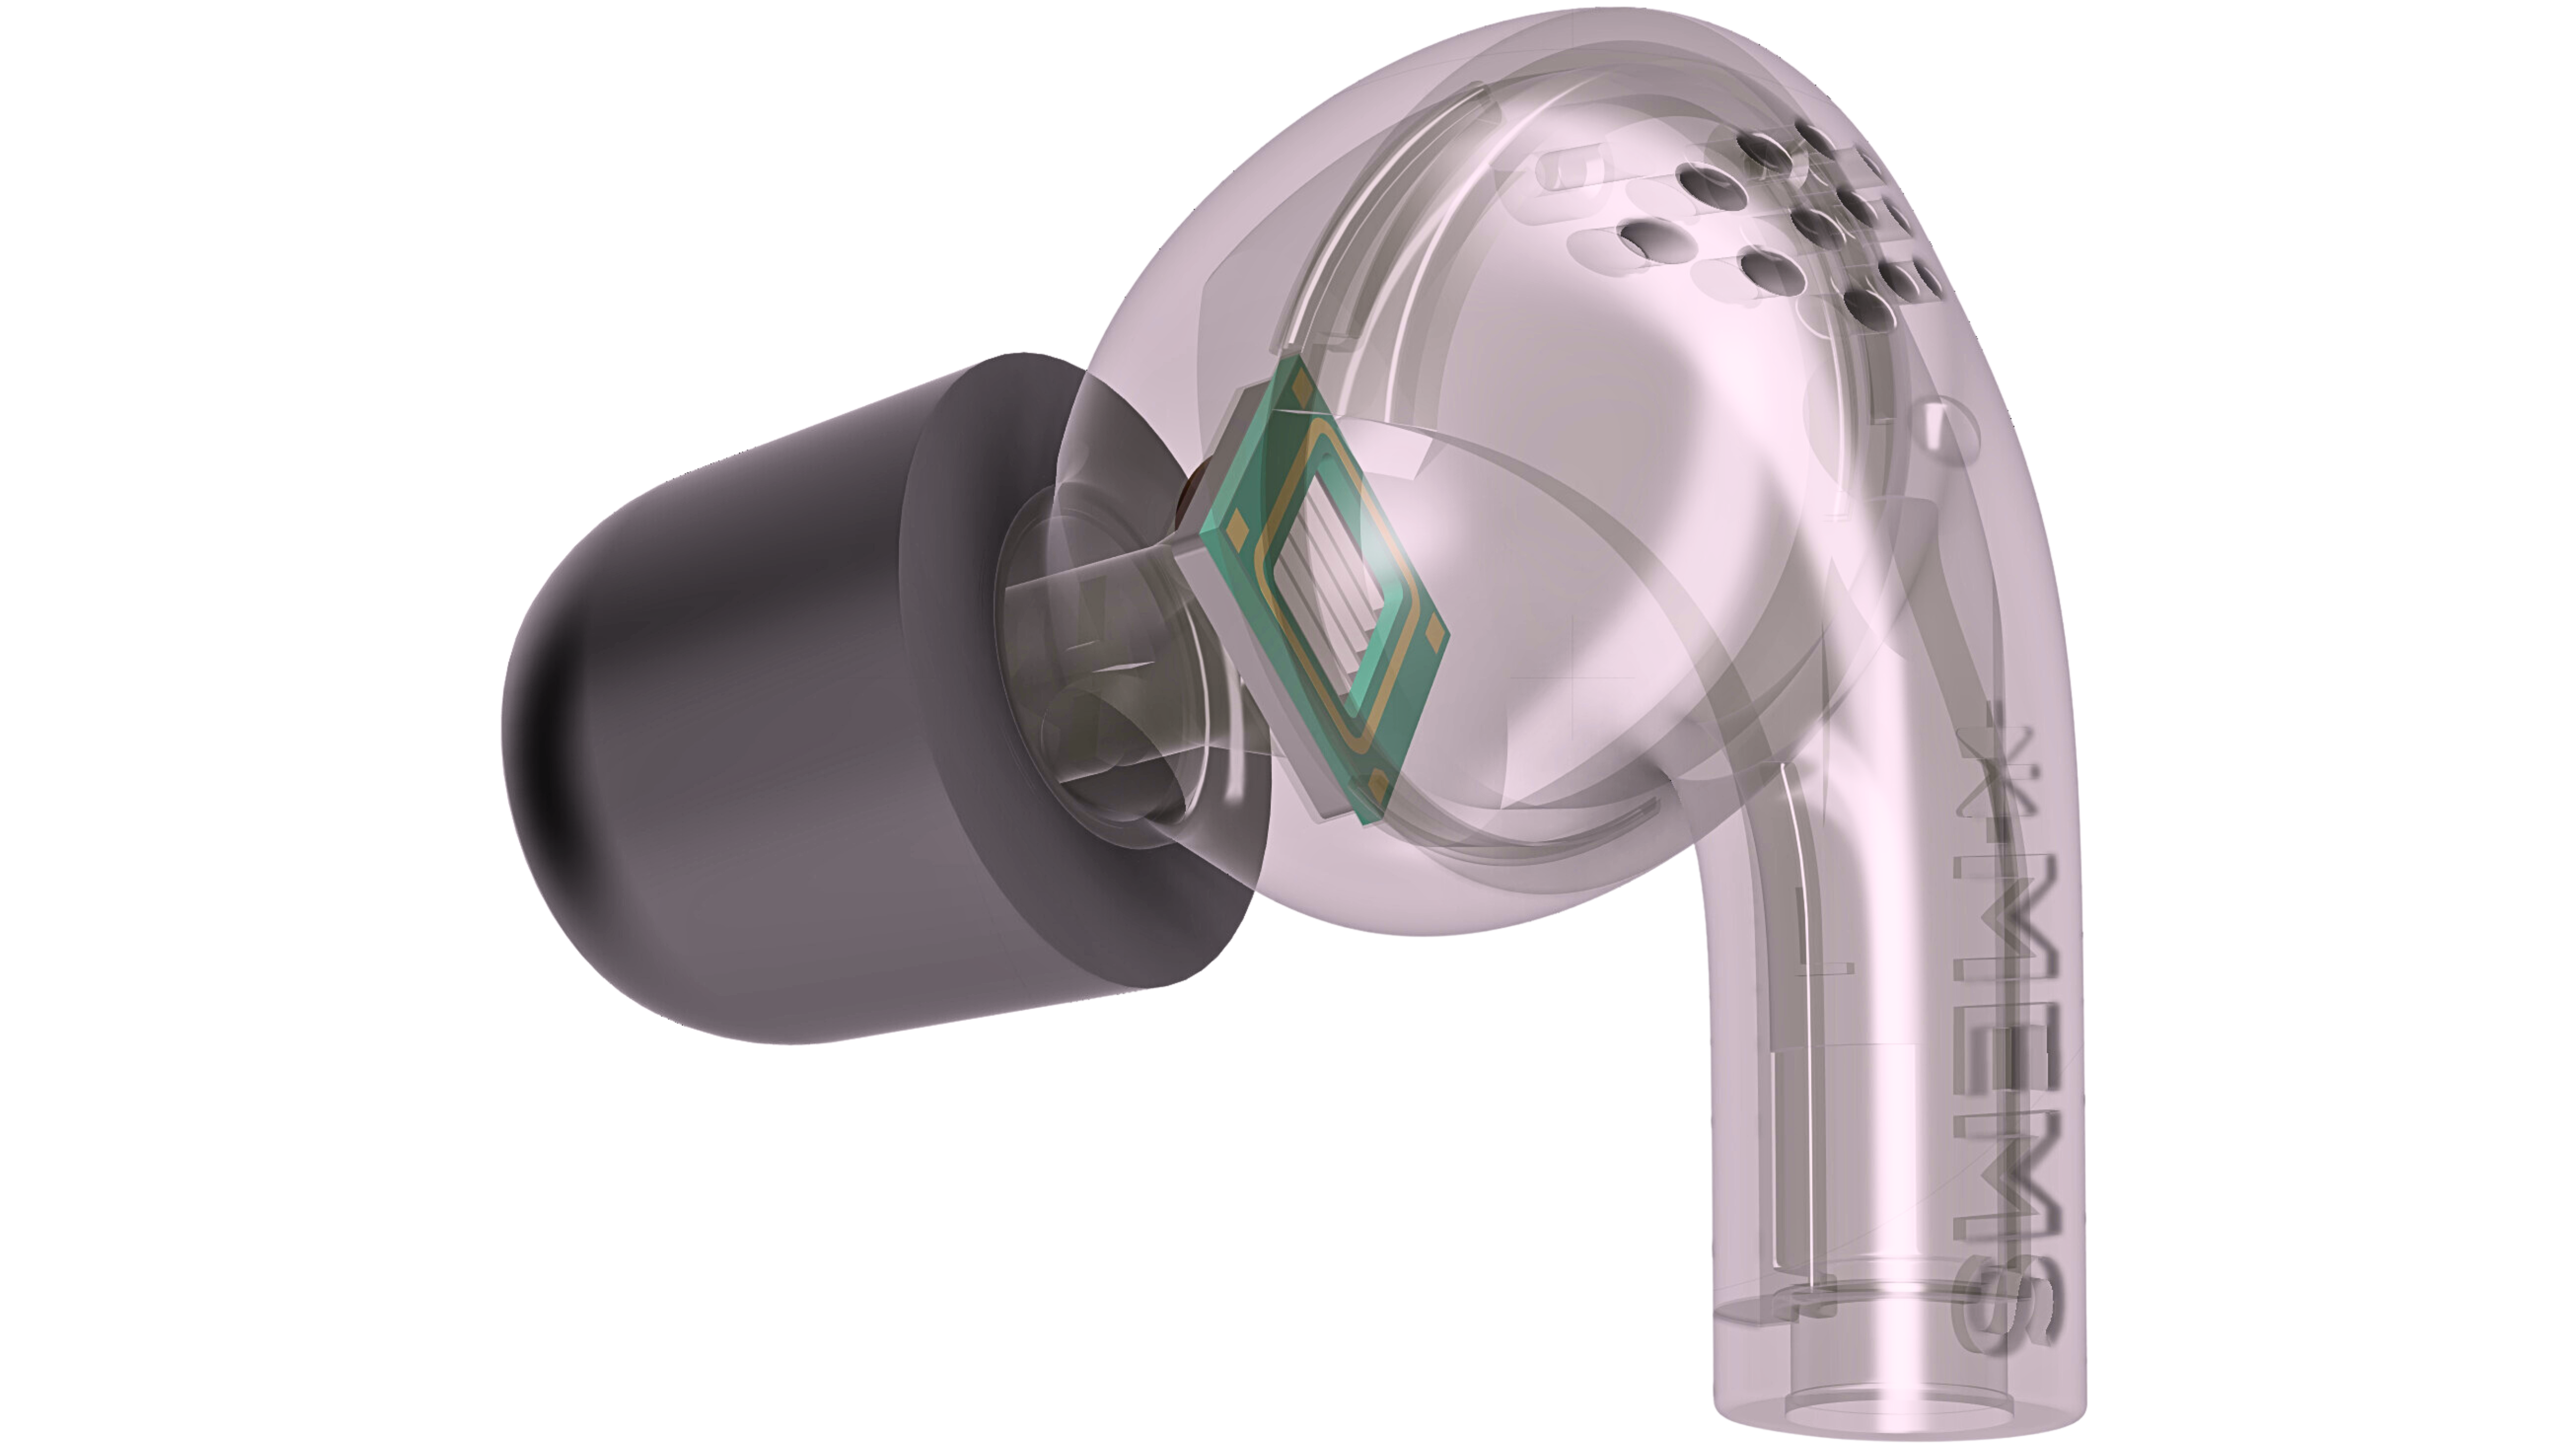 A manufacturer render of the xMEMS Cypress inside a fictional earbud.